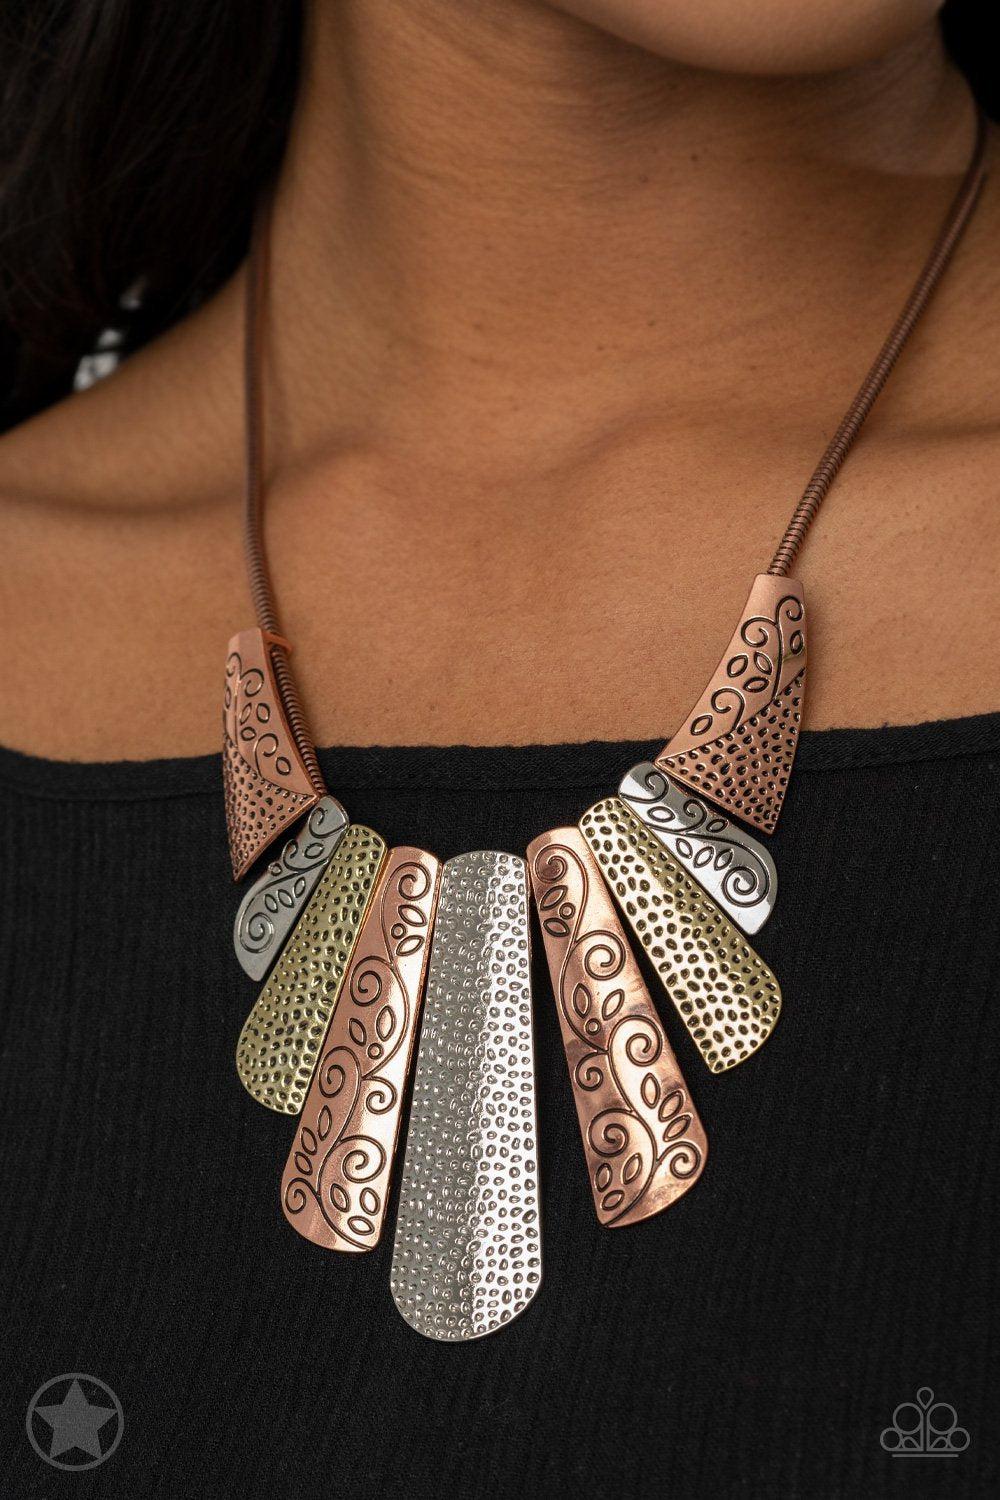 Untamed Silver Copper and Brass Statement Necklace and matching Earrings - Paparazzi Accessories - lightbox -CarasShop.com - $5 Jewelry by Cara Jewels